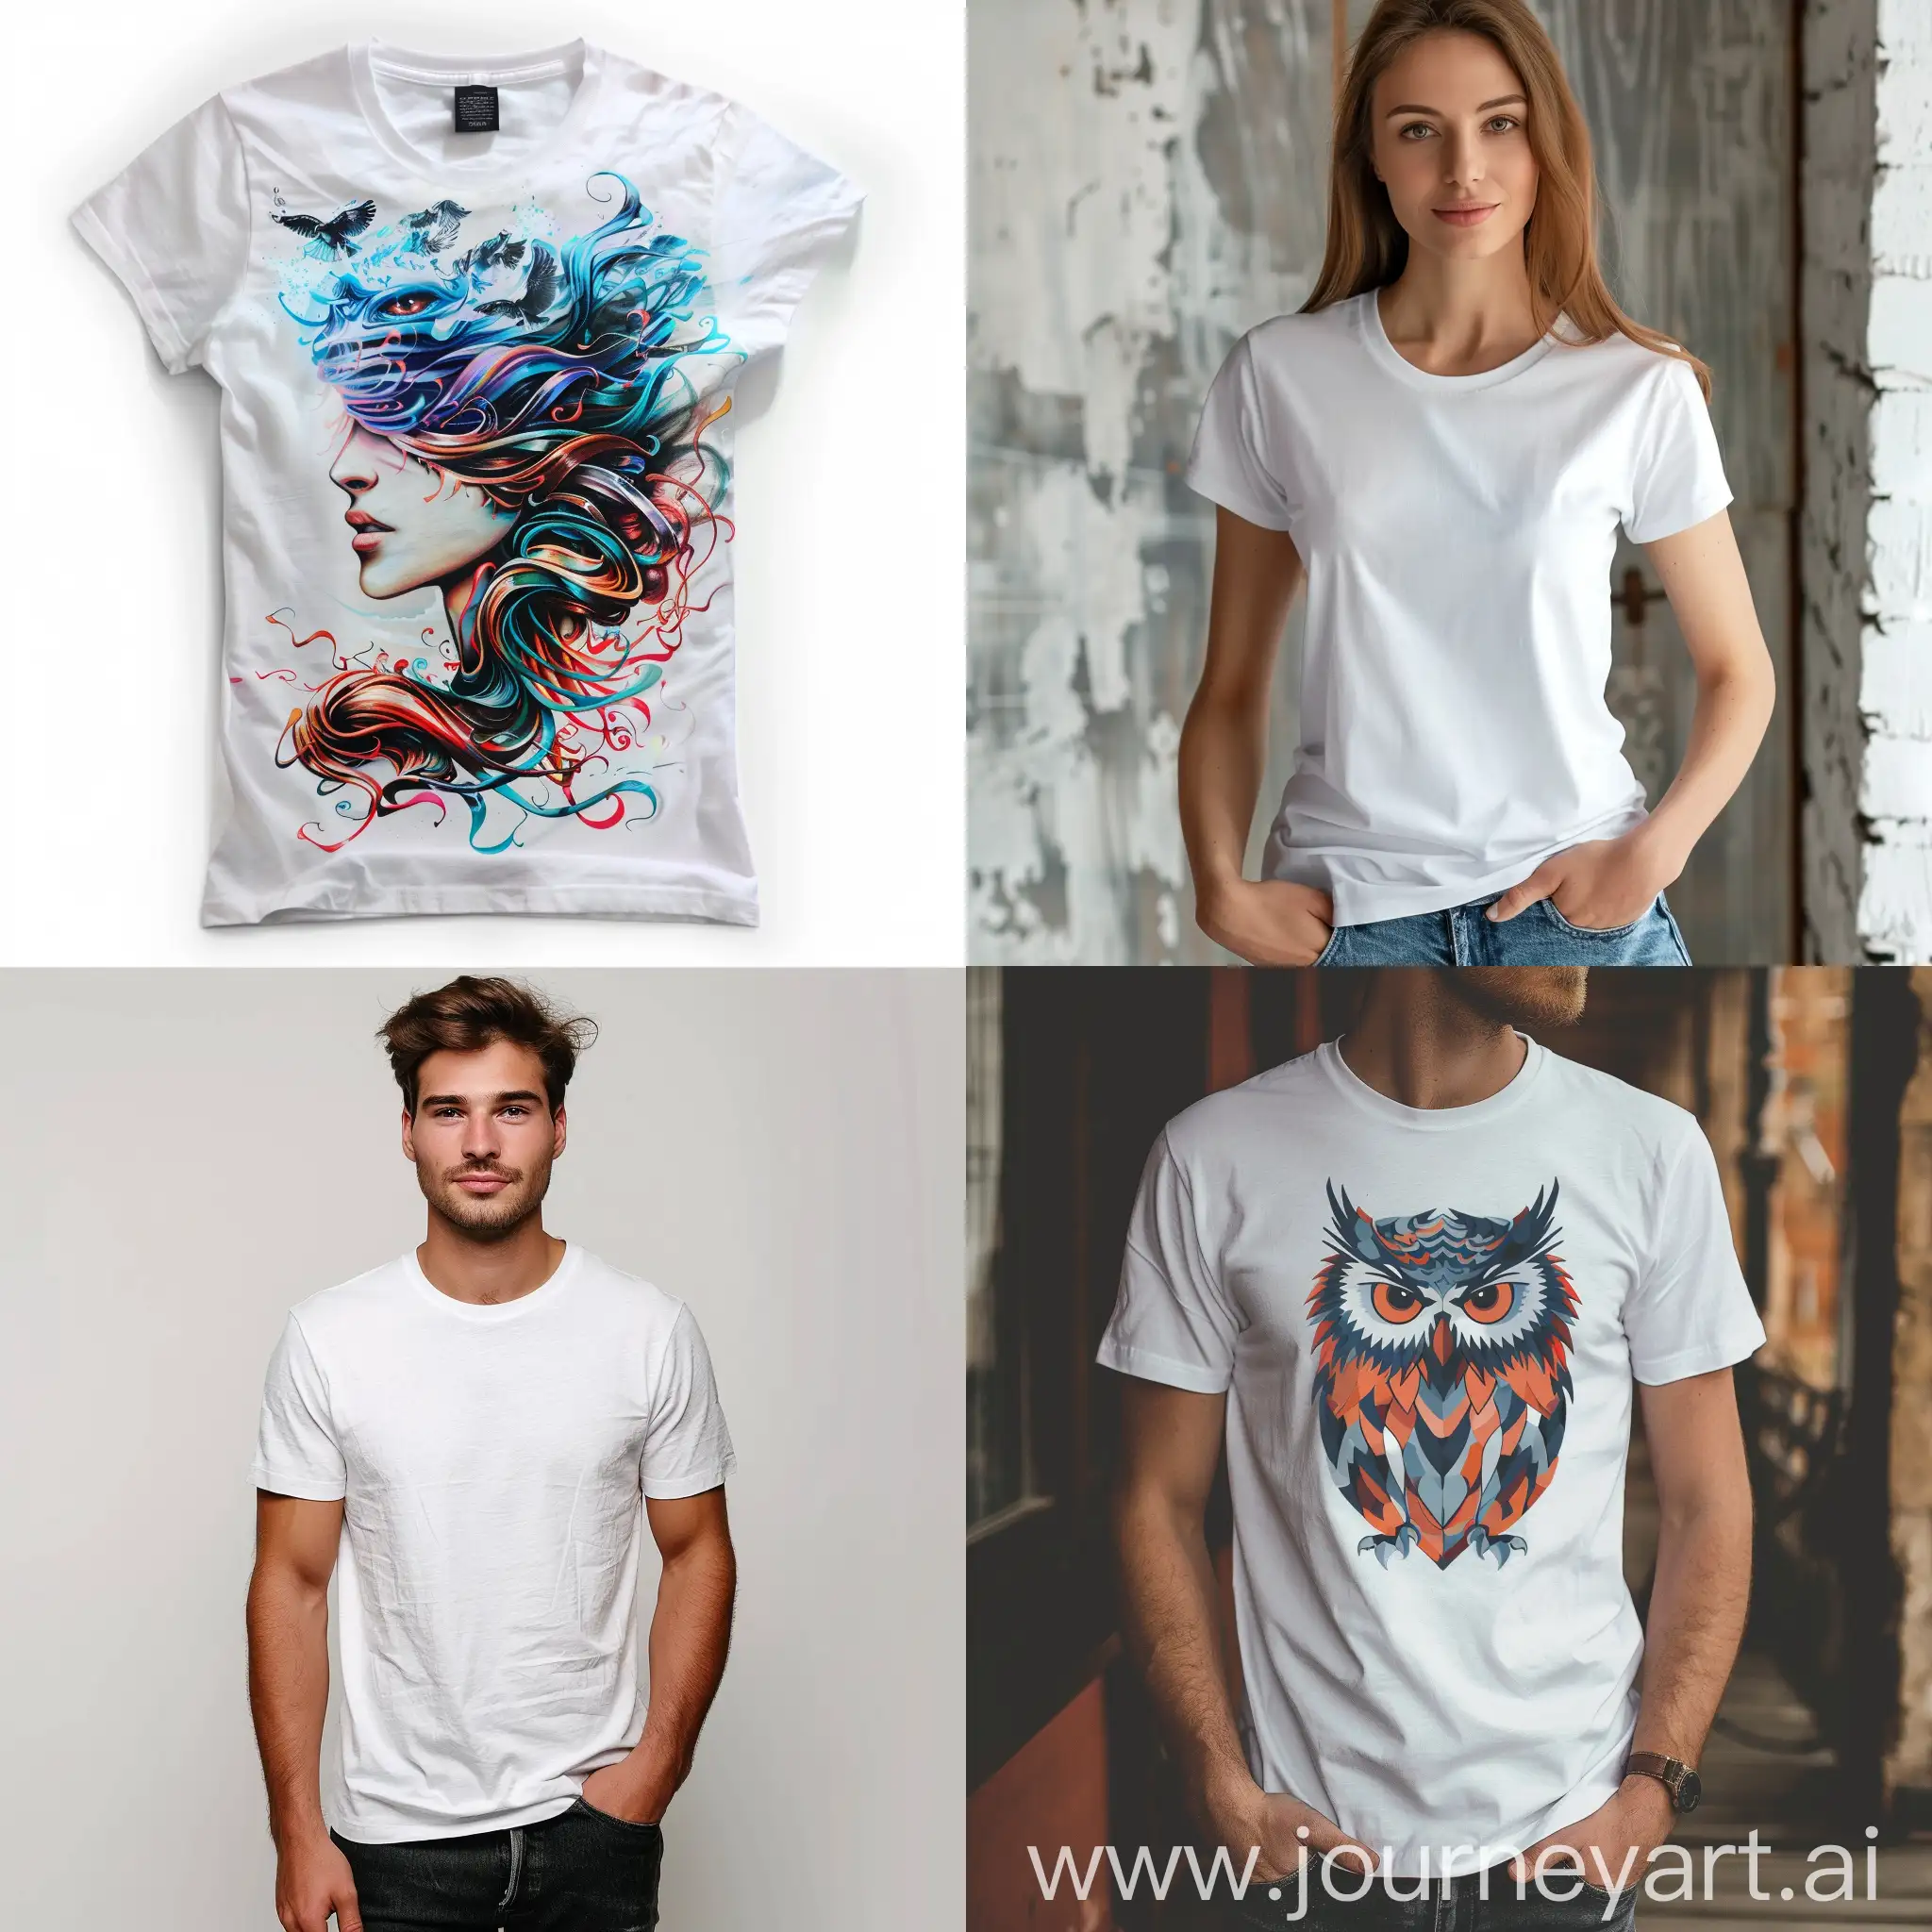 Colorful-TShirt-Display-Vibrant-Variety-in-Square-Format